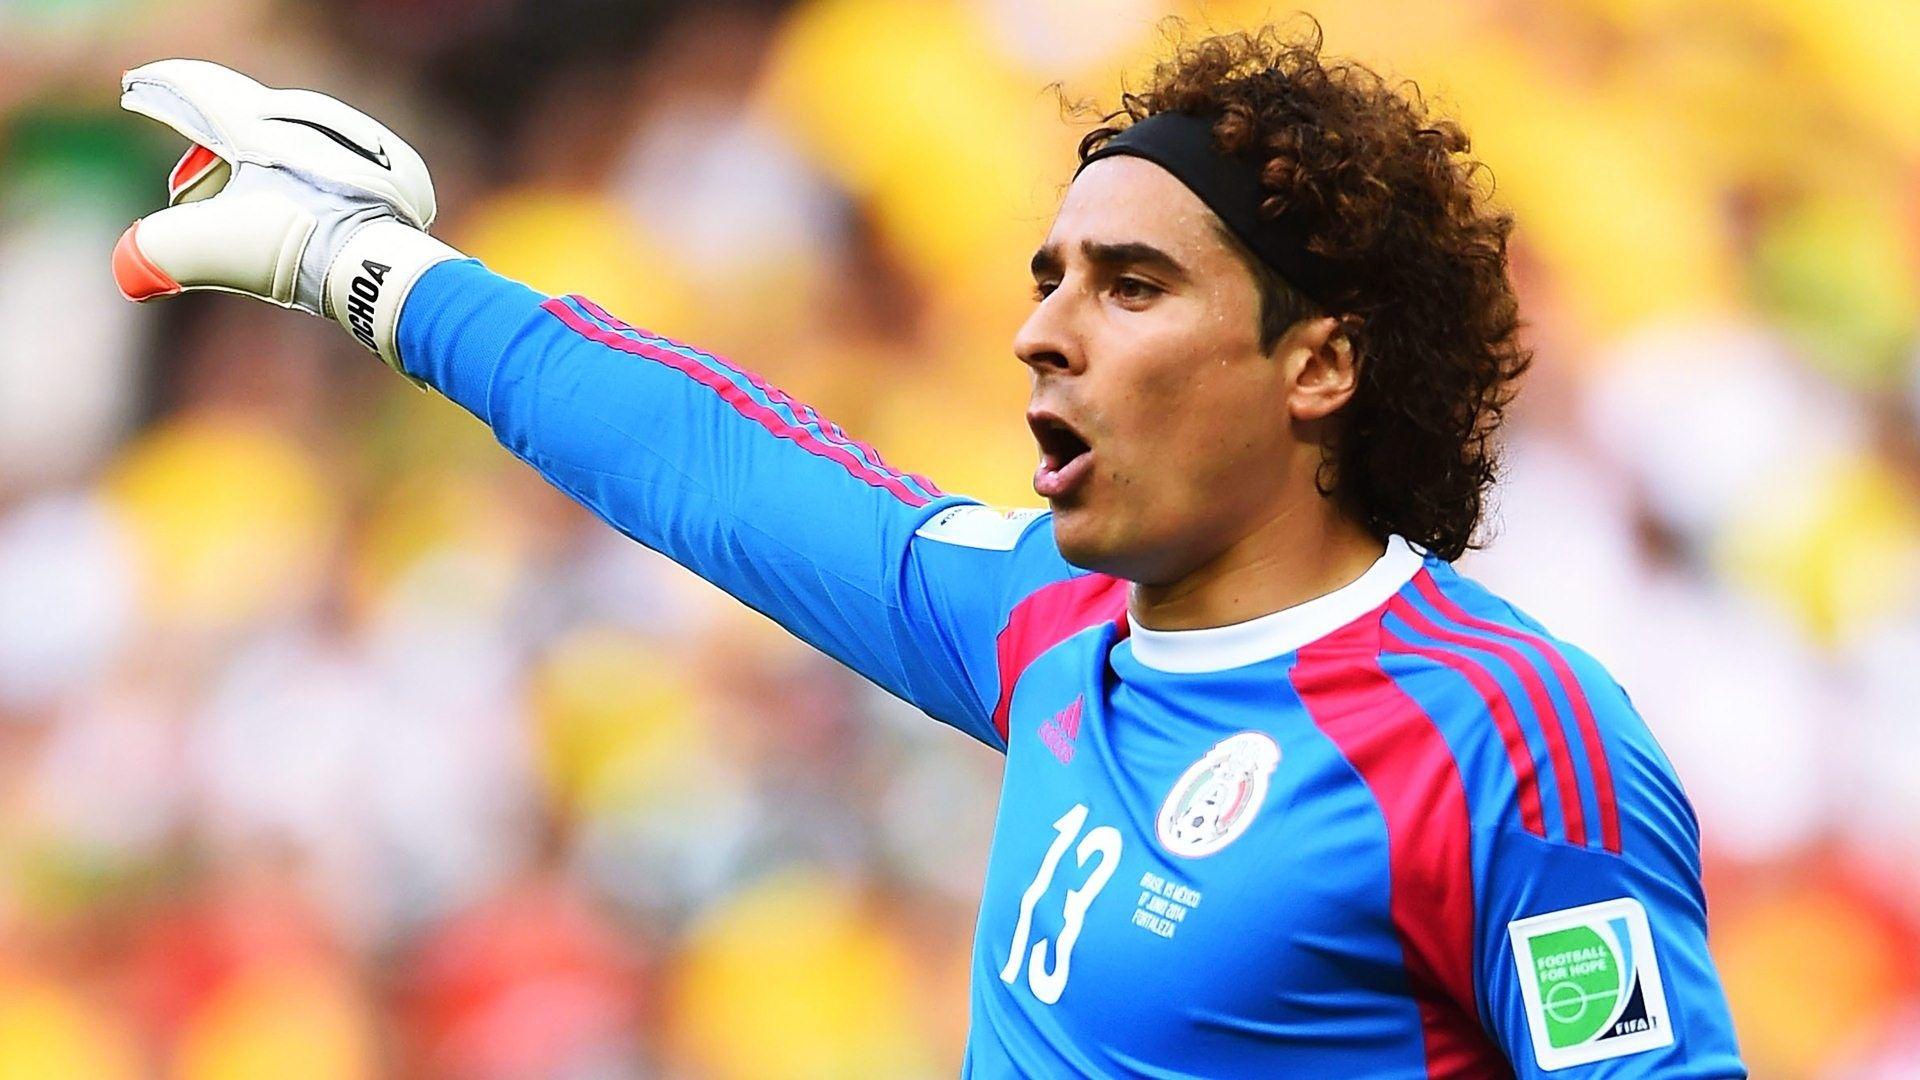 High Resolution Wallpapers guillermo ochoa pic, 1920 x 1080.